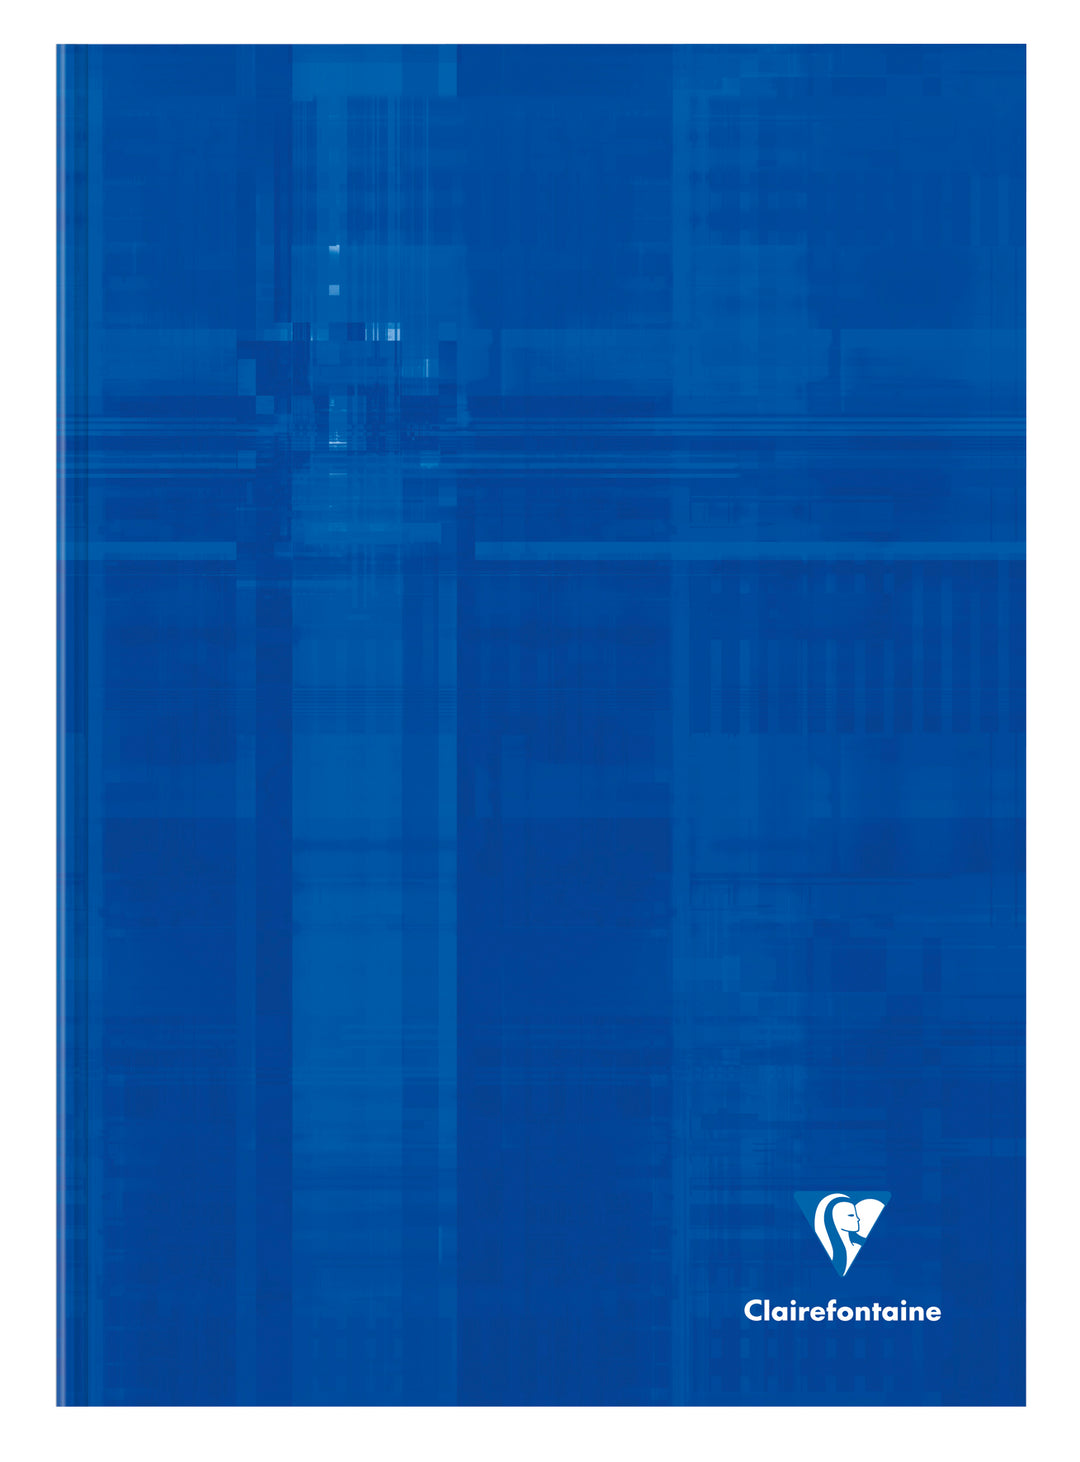 Clairefontaine Basics Square Ruled Hardcover Notebook - A4 - 297 mm x 210 mm